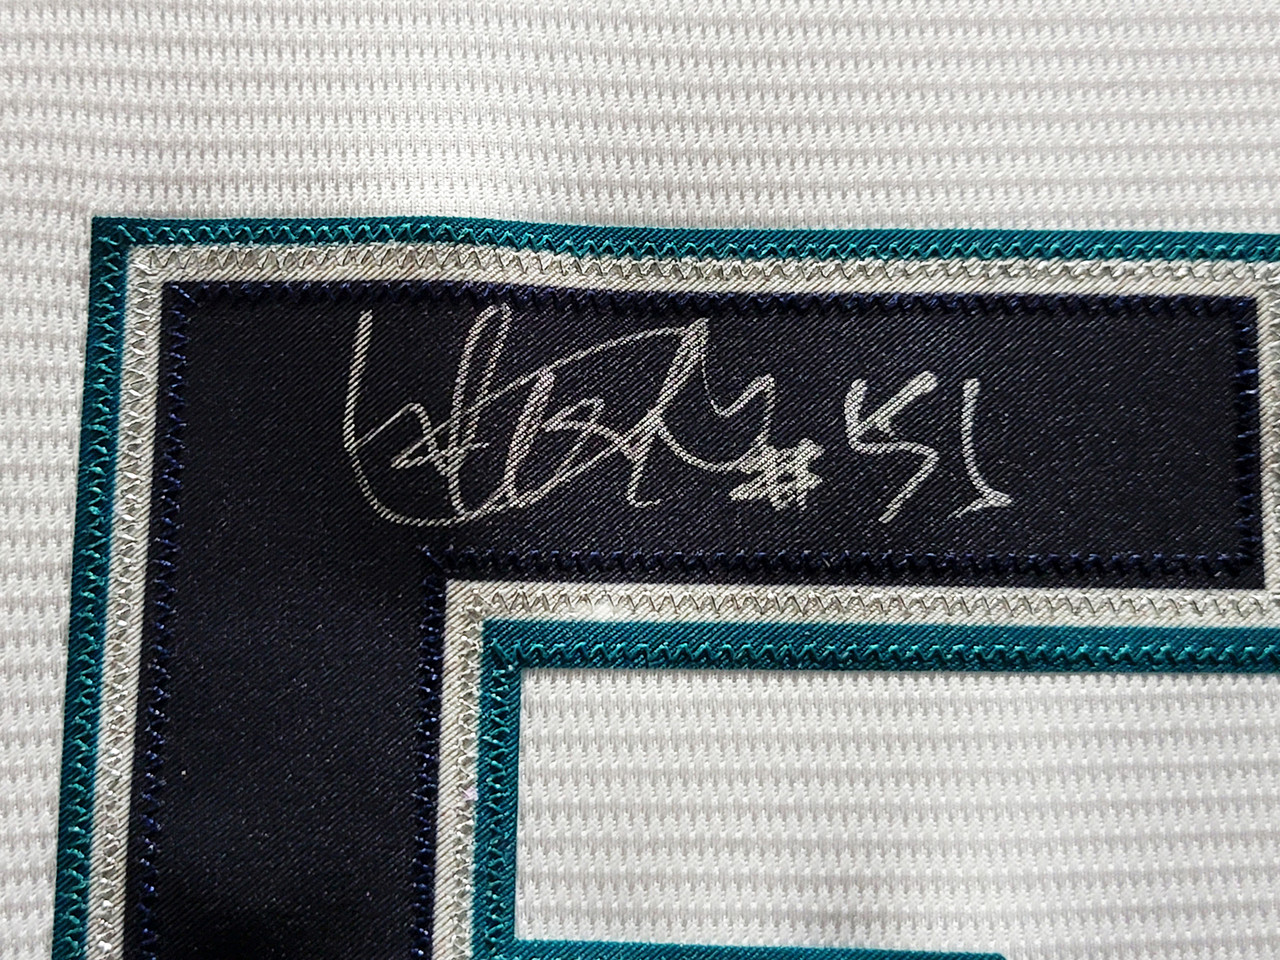 Seattle Mariners Ichiro Suzuki Autographed White Authentic Mitchell & Ness  2001 All Star Patch Jersey Size 44 MLB Debut 4-2-01 IS Holo Stock #217972  - Mill Creek Sports